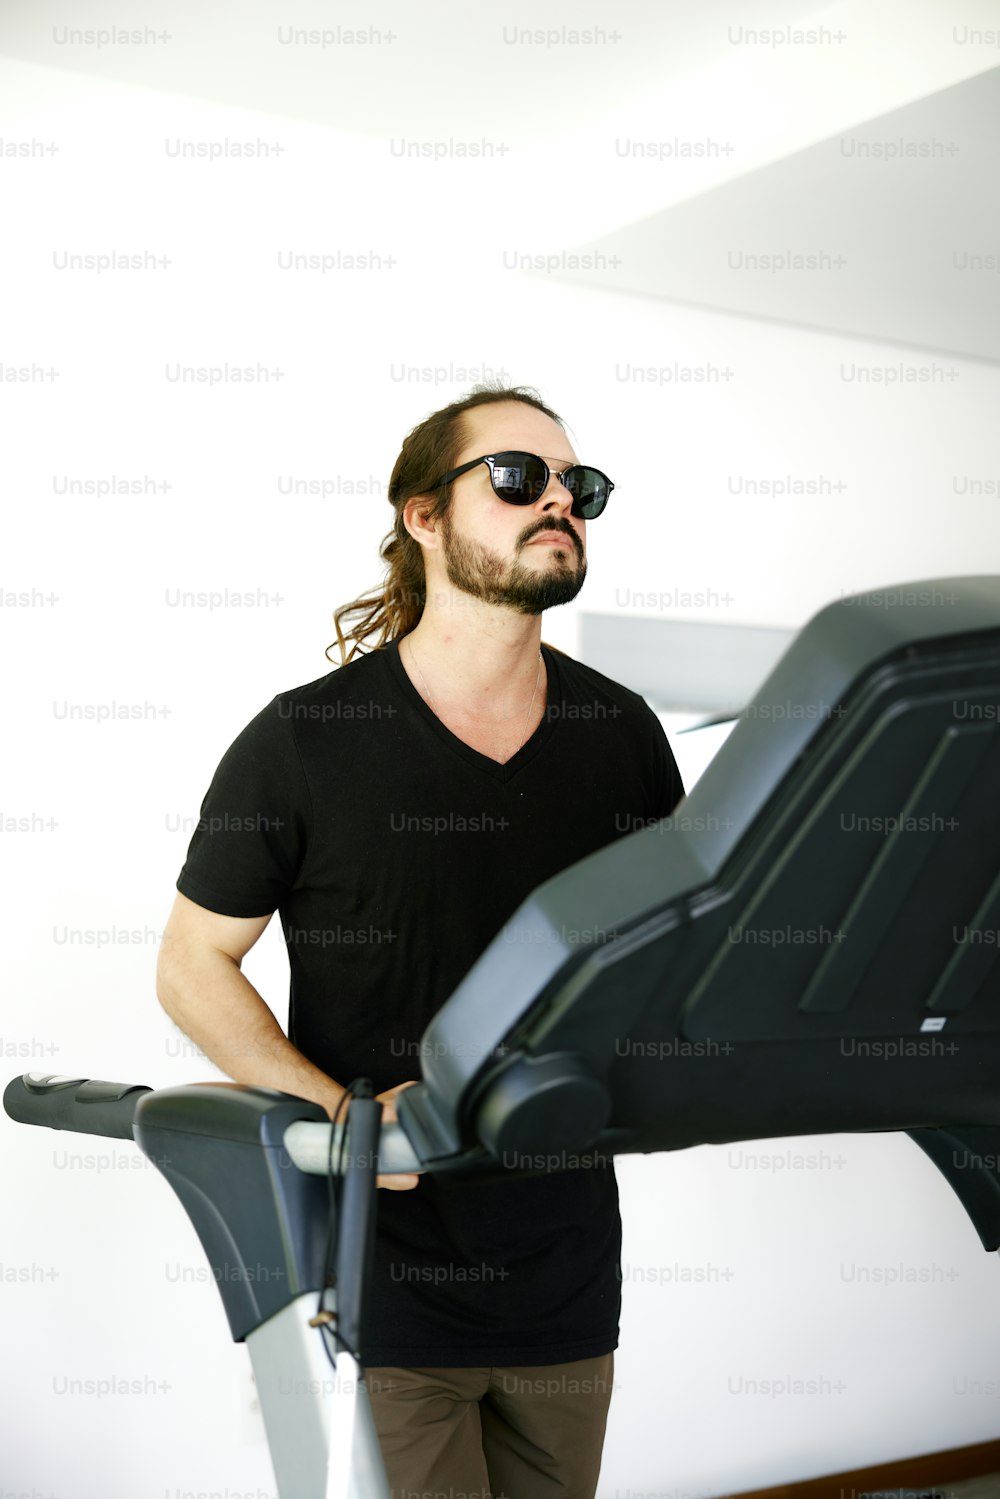 a man with long hair and sunglasses standing next to a treadmill